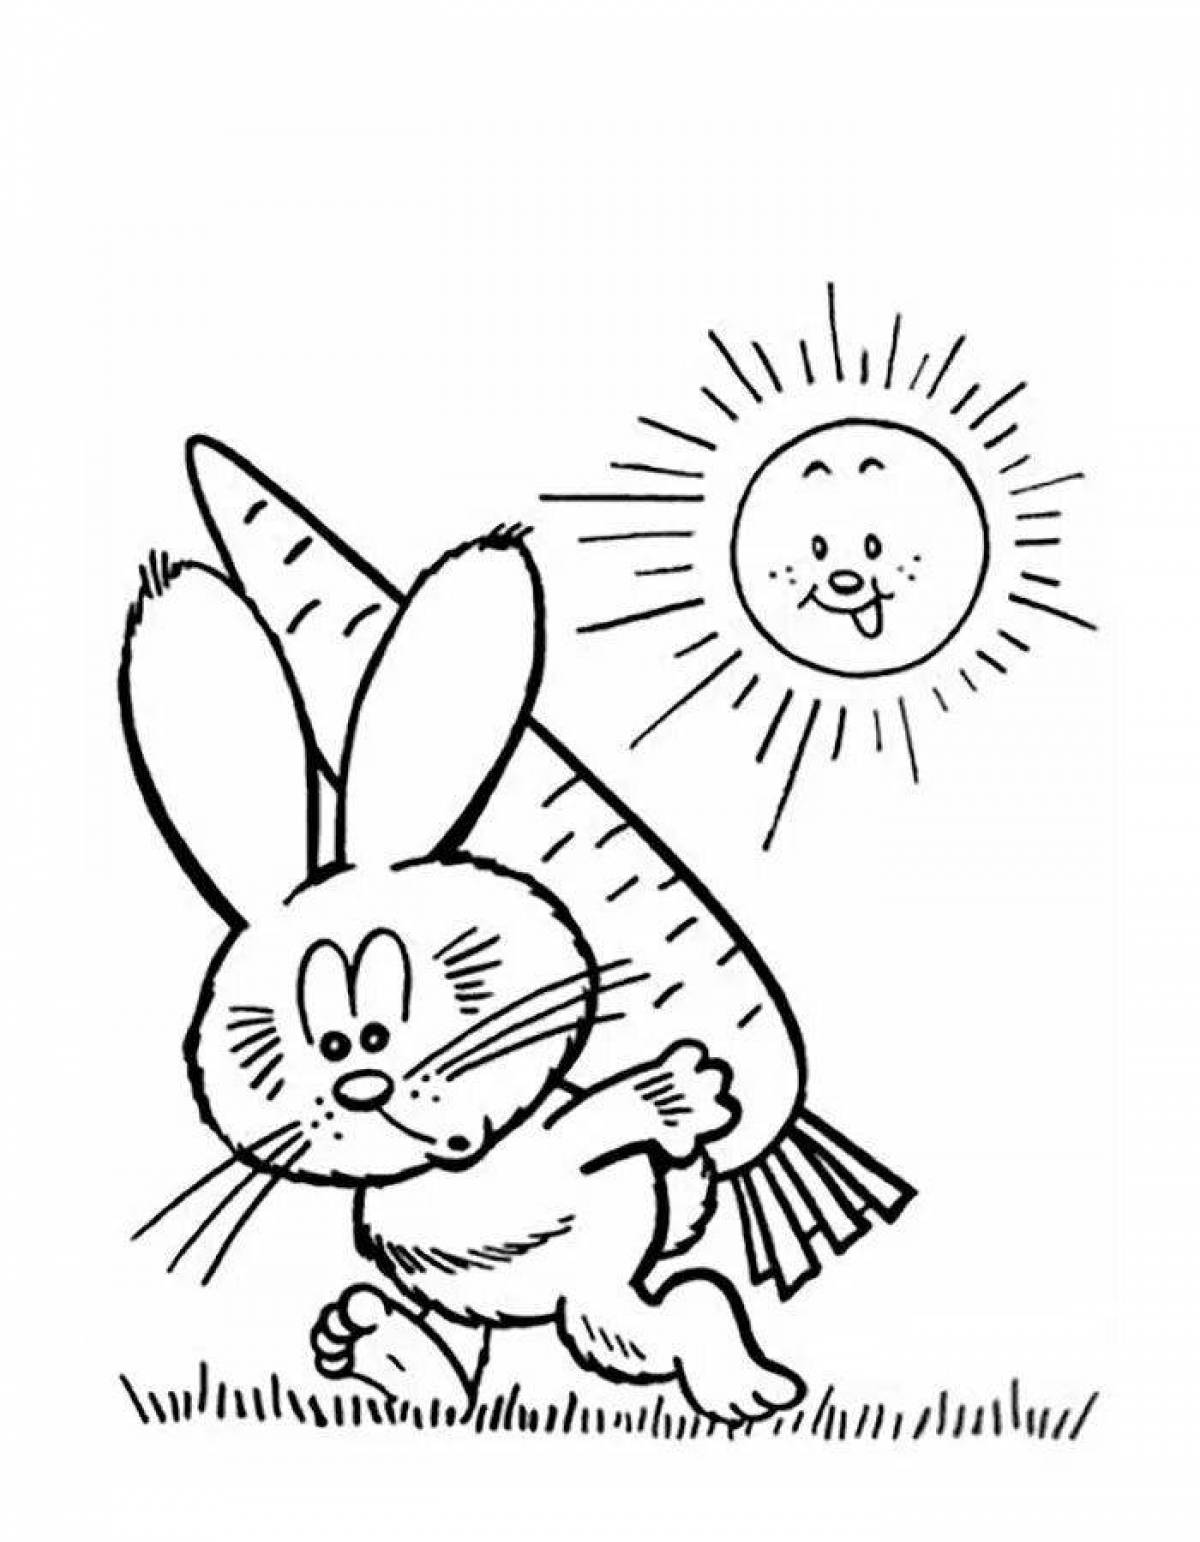 Glowing cat and hare coloring page